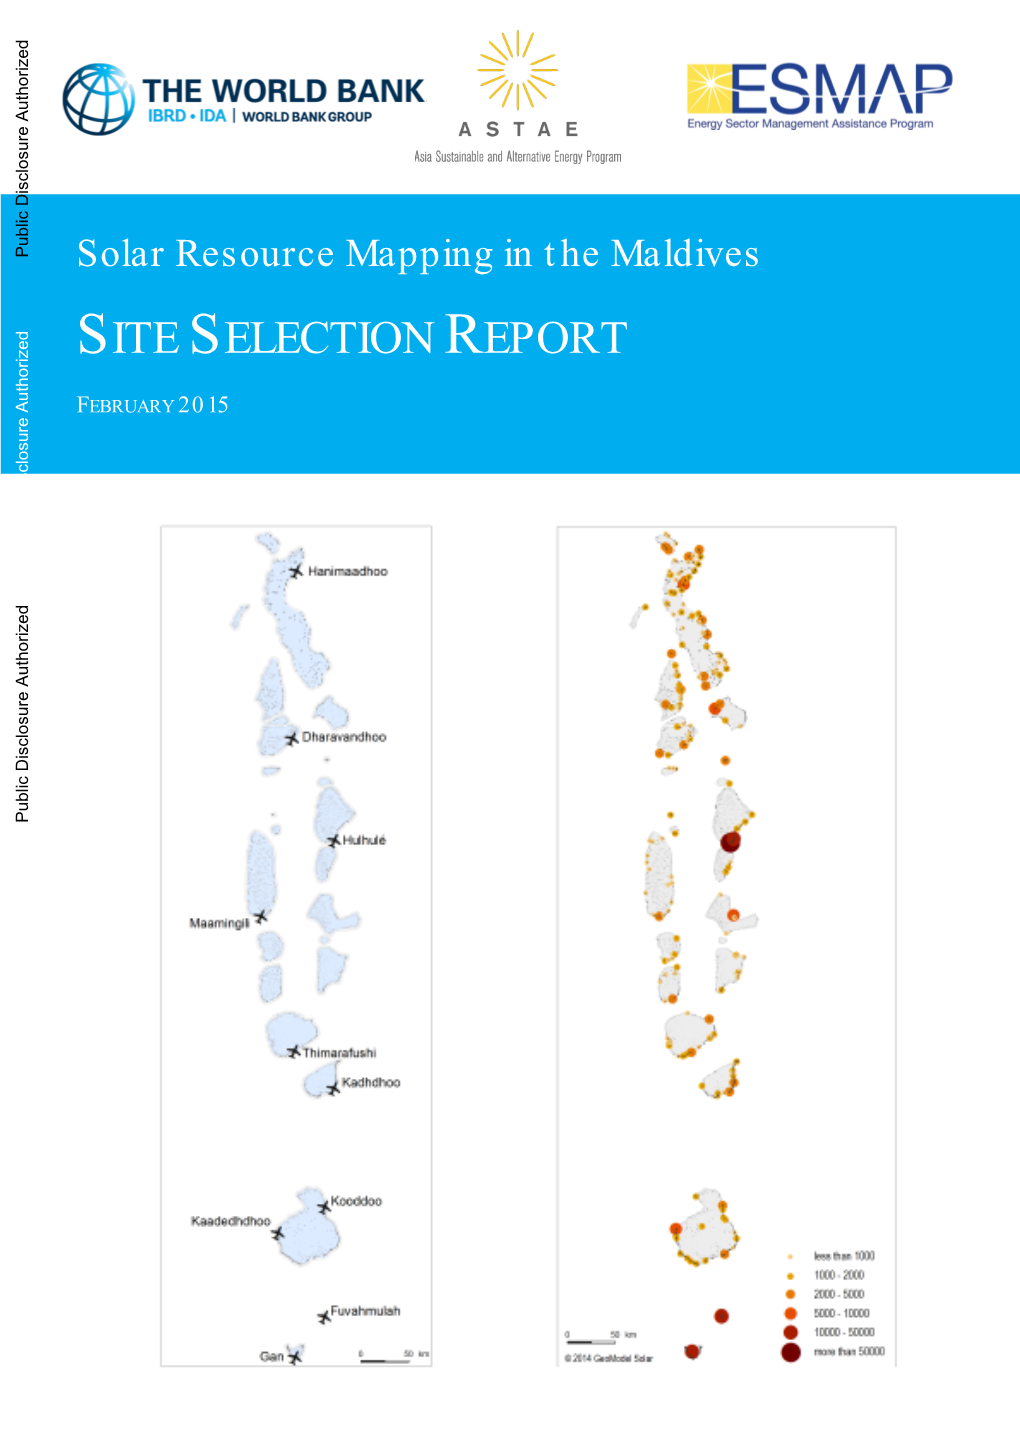 Solar Resource Mapping in the Maldives SITE SELECTION REPORT